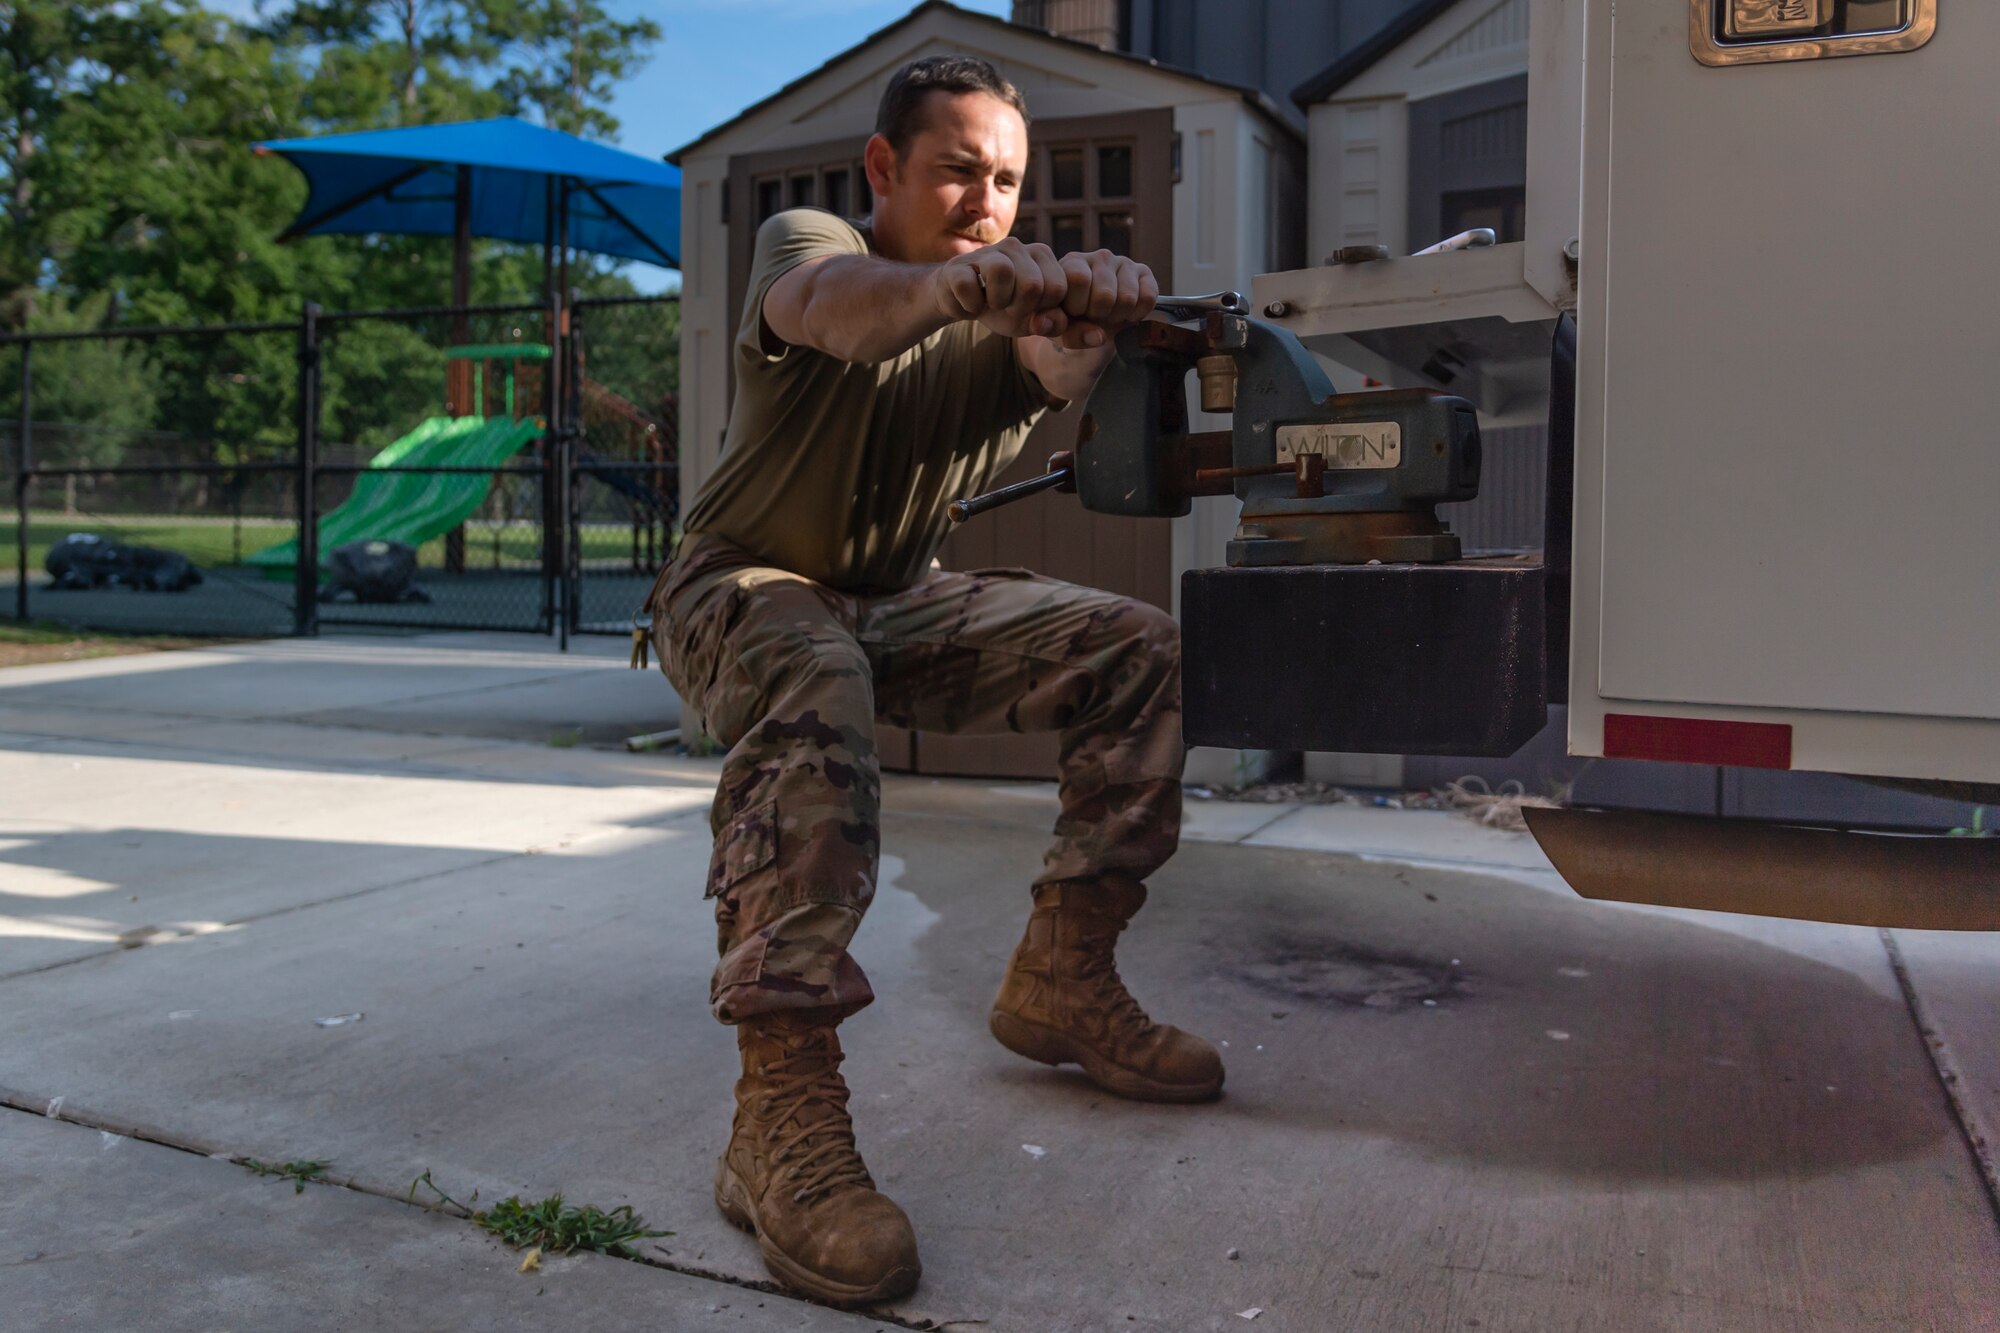 Staff Sgt. Daniel Champion, 23d Civil Engineer Squadron (CES) water and fuel systems maintenance craftsman, tightens a plug into a fitting, July 2, 2019, at Moody Air Force Base, Ga. Airmen from the 23d CES Water and Fuels Systems Maintenance are on-call 24/7 to sustain and maintain the base, water, sewer and gas lines and upkeep of the 696 facilities with water and fuel infrastructure. (U.S. Air Force photo by Airman 1st Class Taryn Butler)